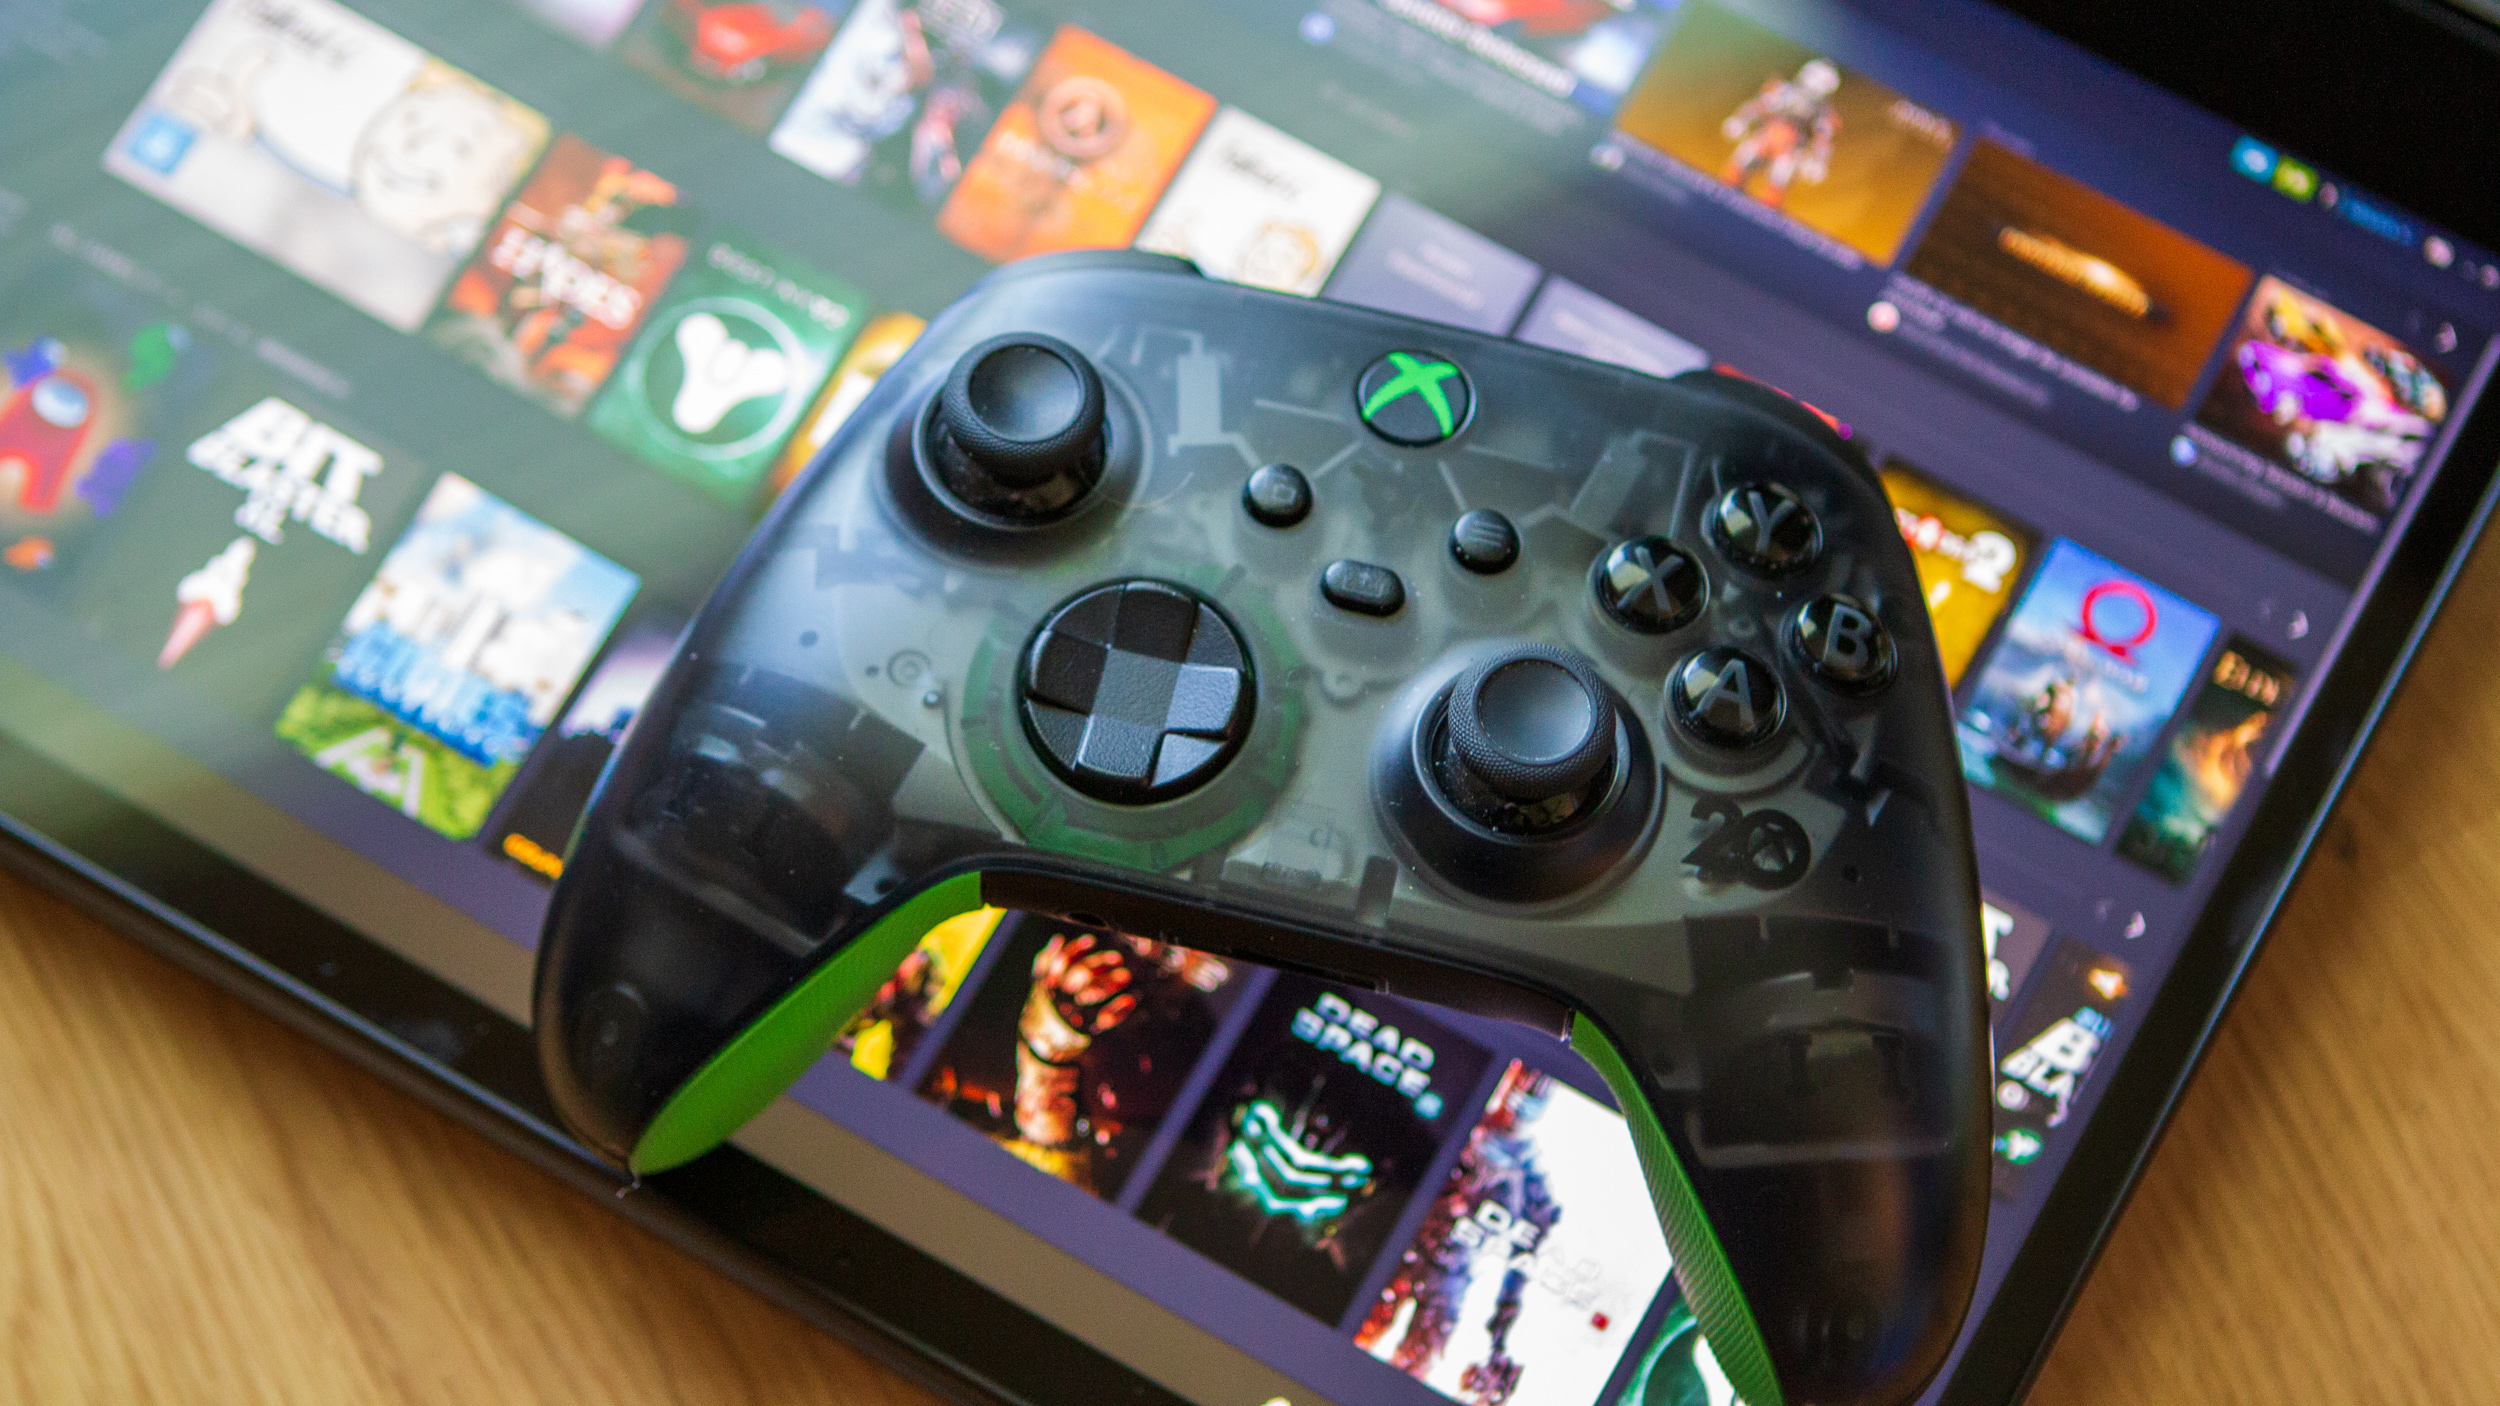 Xbox Controller on Acer Chromebook Spin 713 in tablet mode